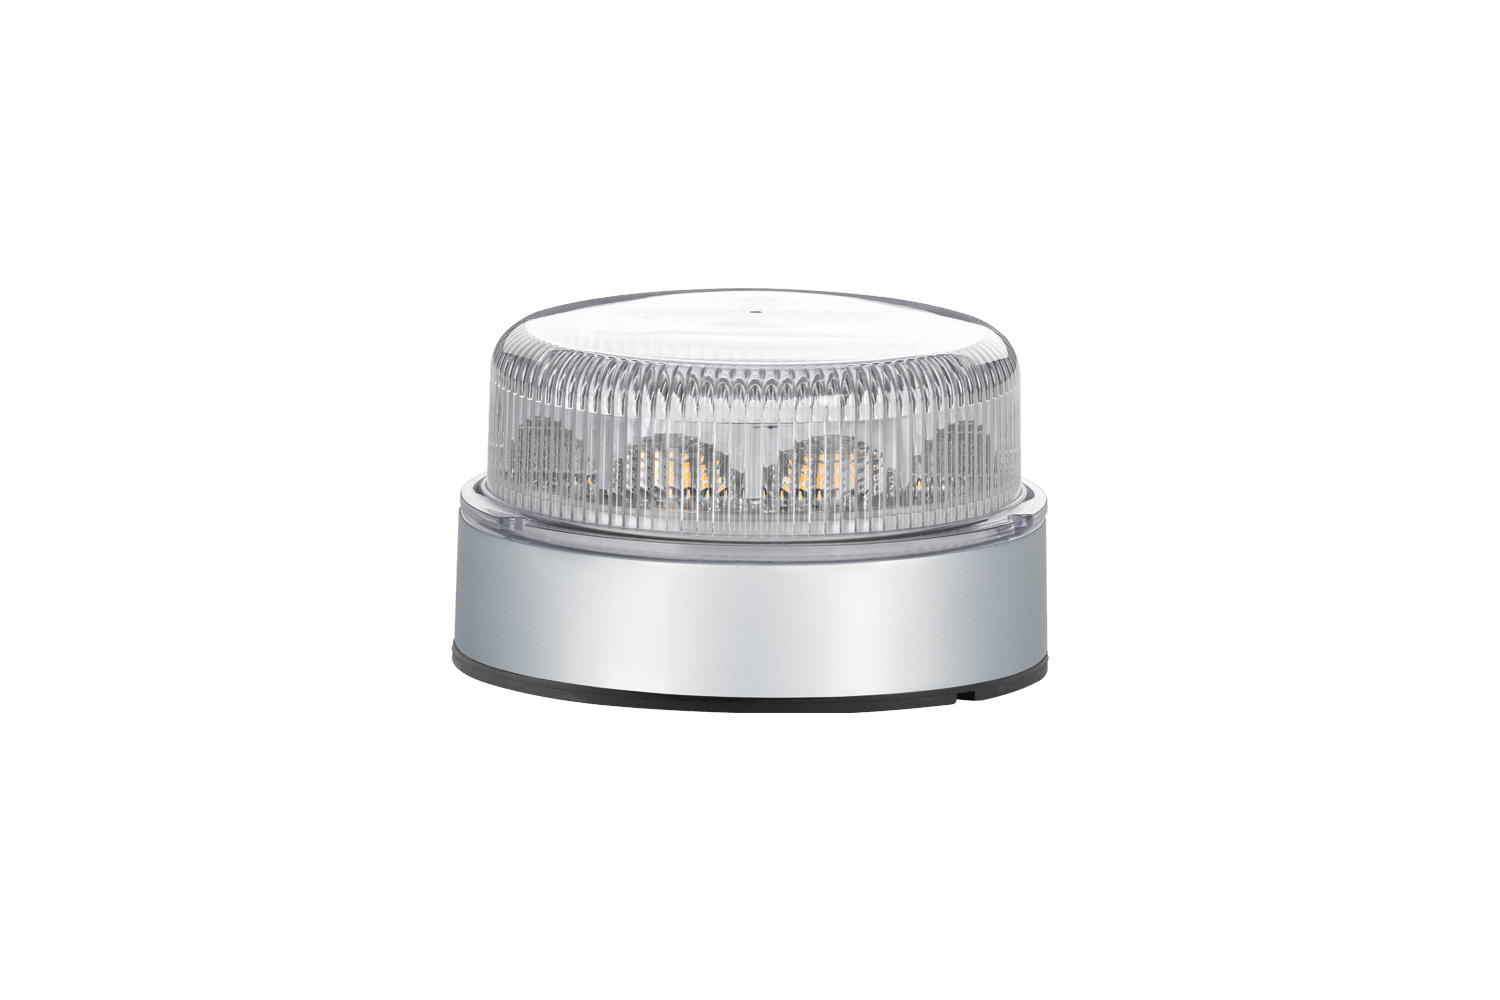 K-LED Blizzard beacon warning lamp from Hella offered by Patlon